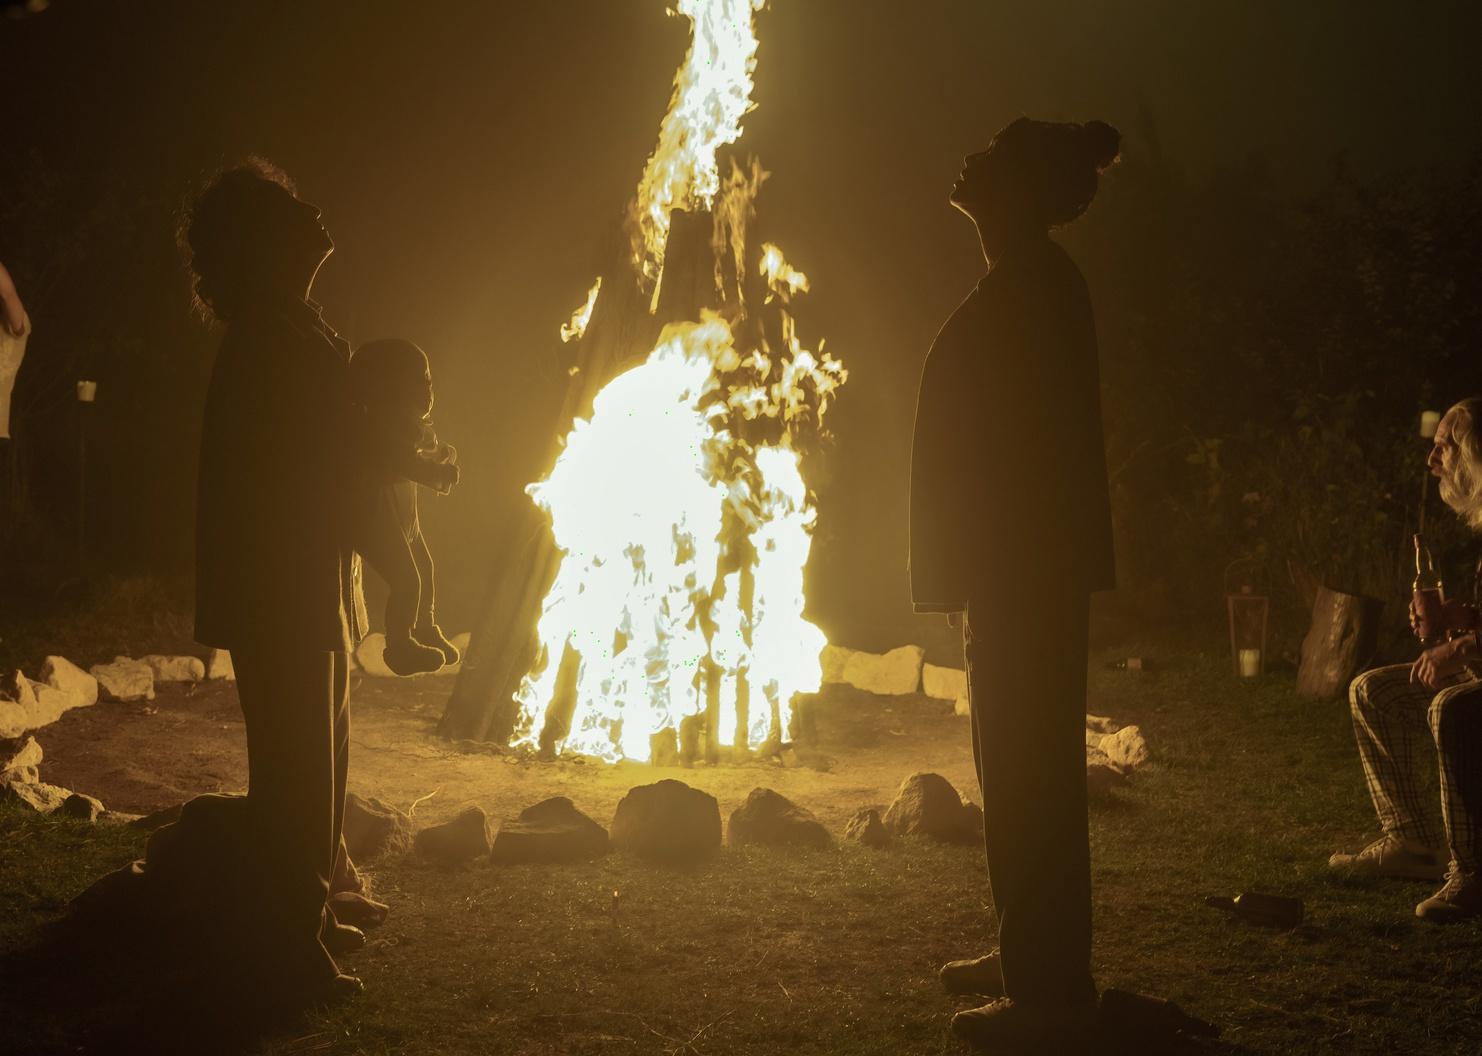 Two women standing next to a bonfire, one of them holding a baby as they look up.